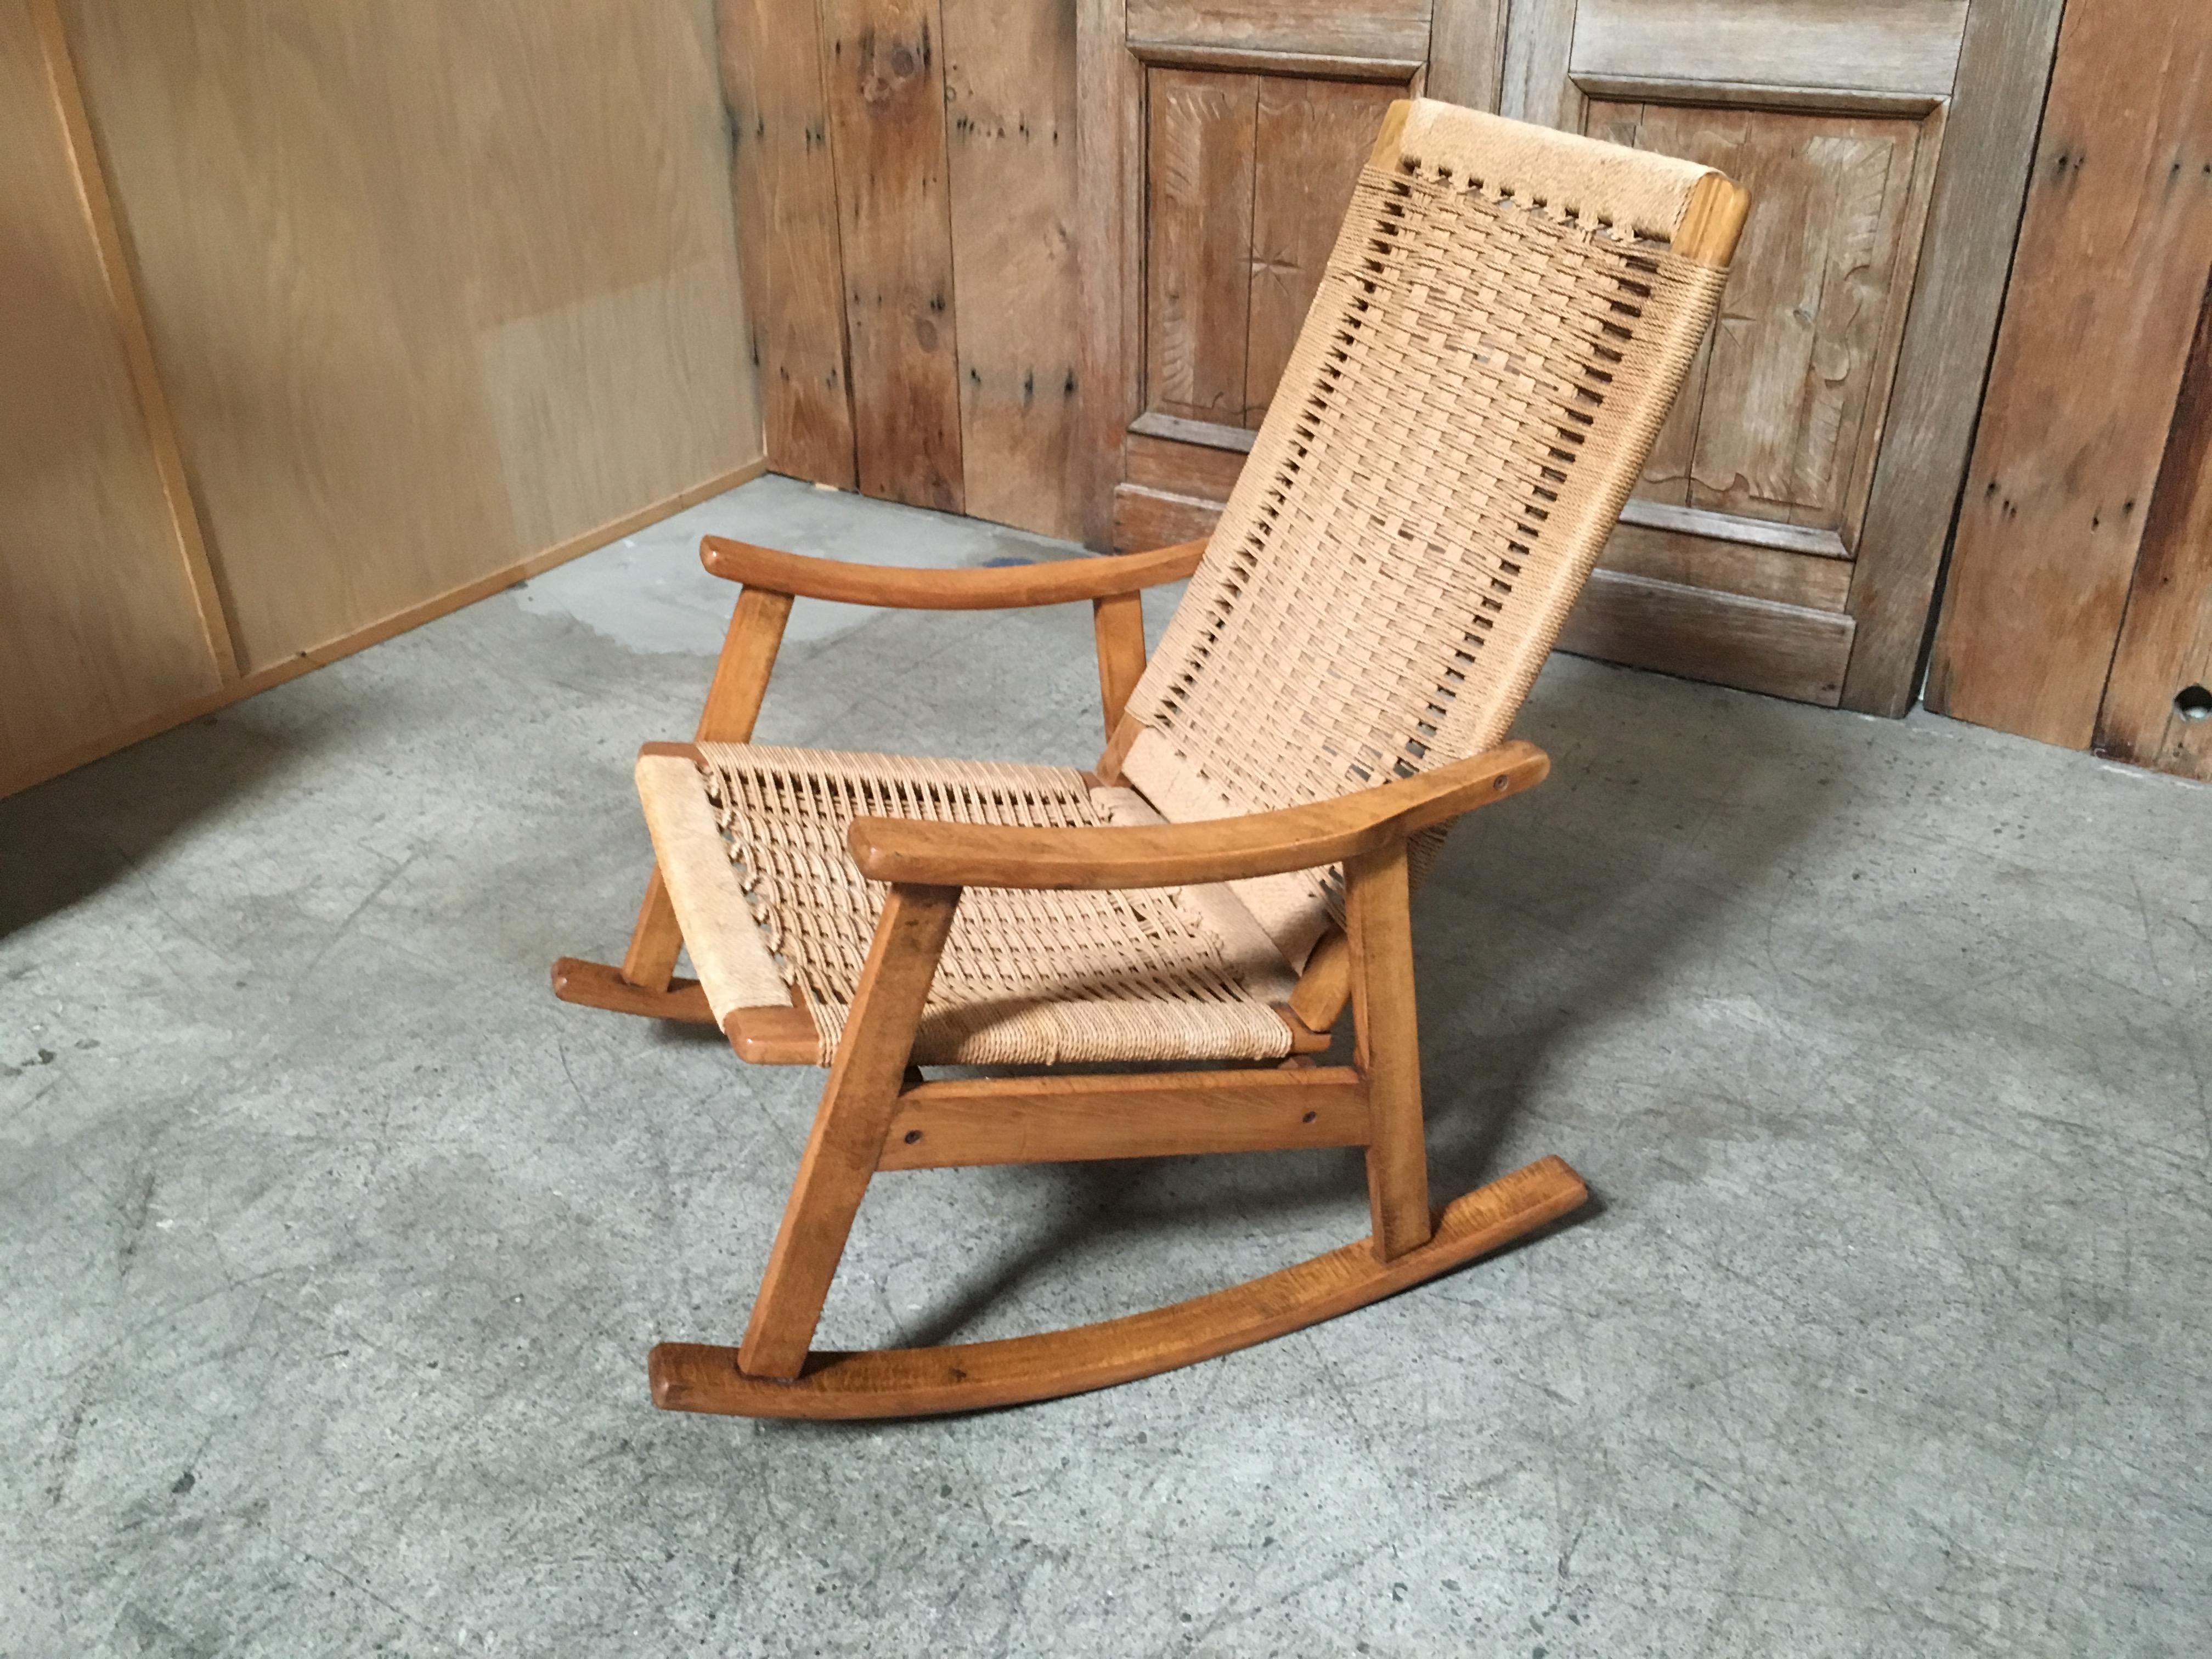 Danish Modern style rocker with rope (cord) seat and back and beechwood frame made in Yugoslavia.